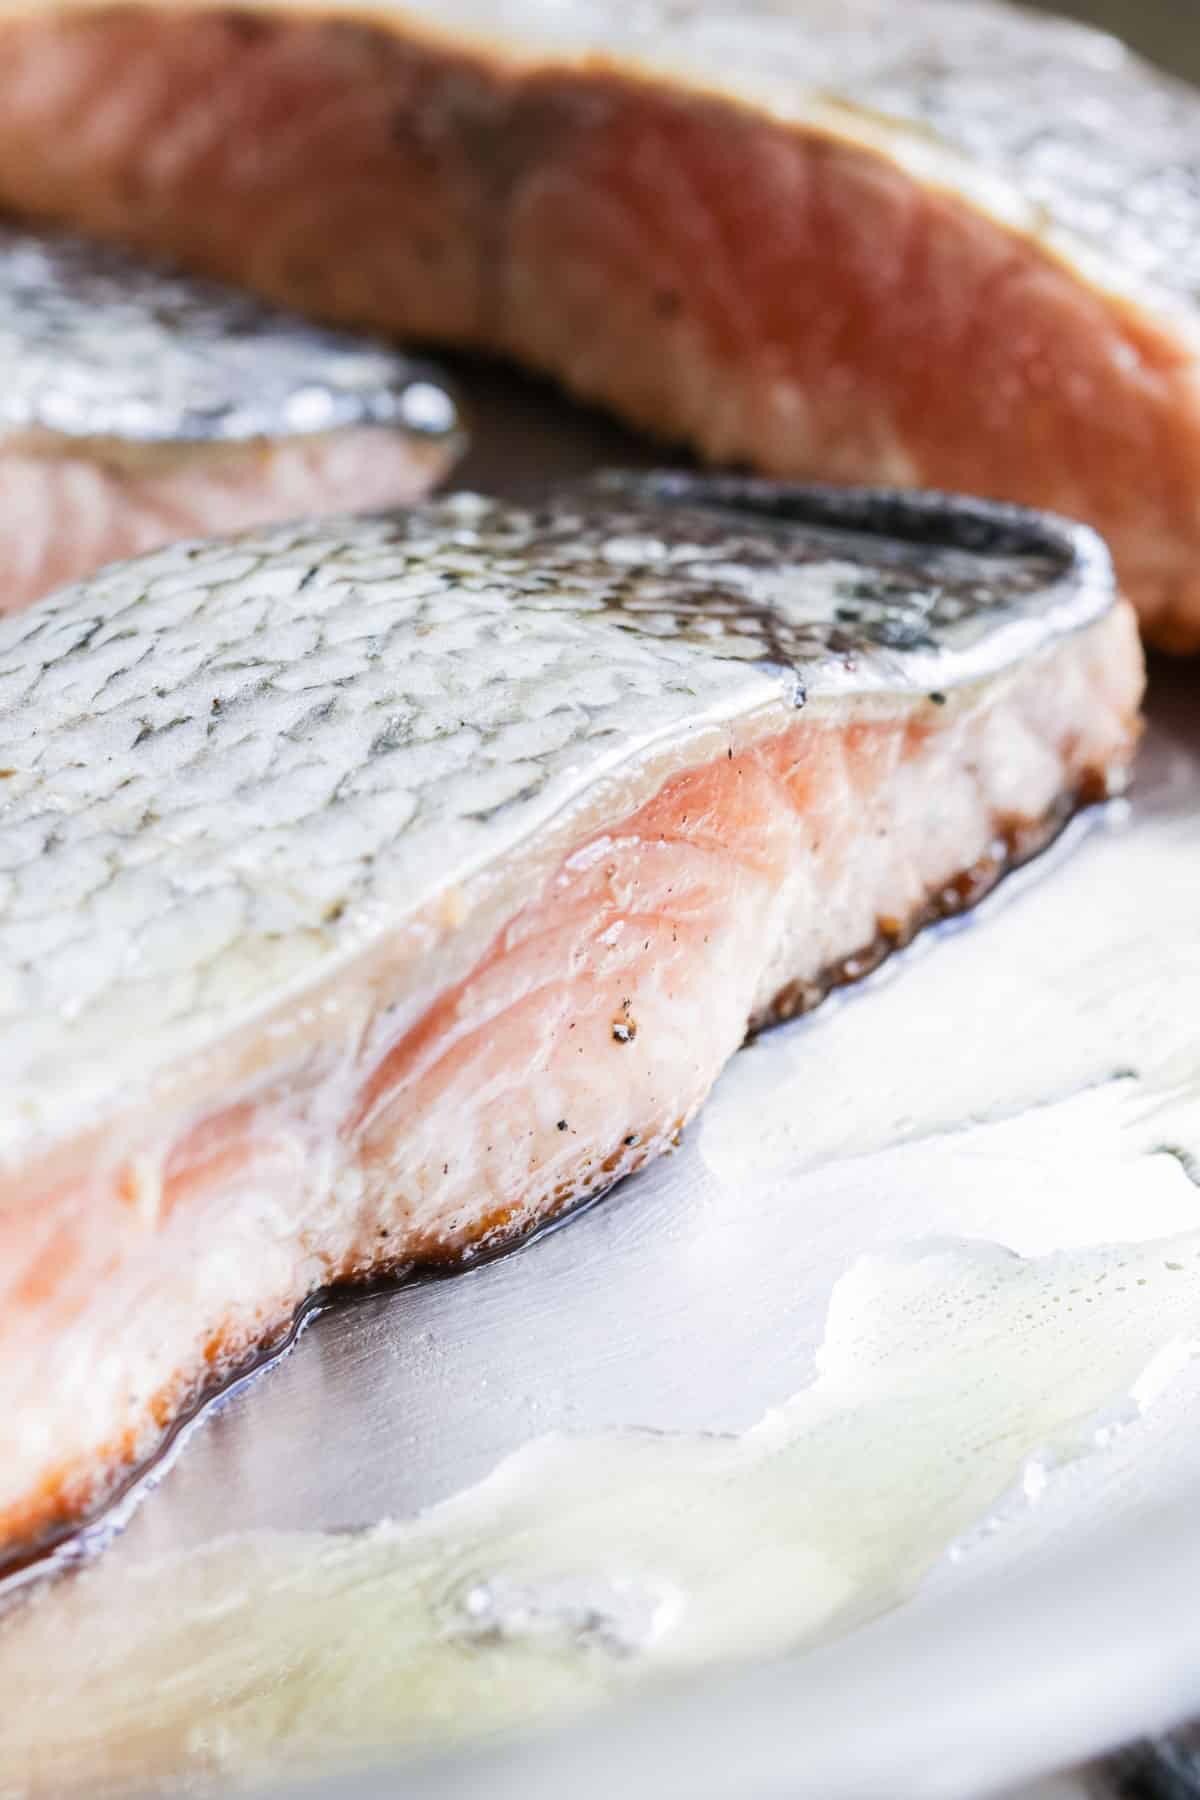 A raw salmon filet being seared in a stainless steel skillet.